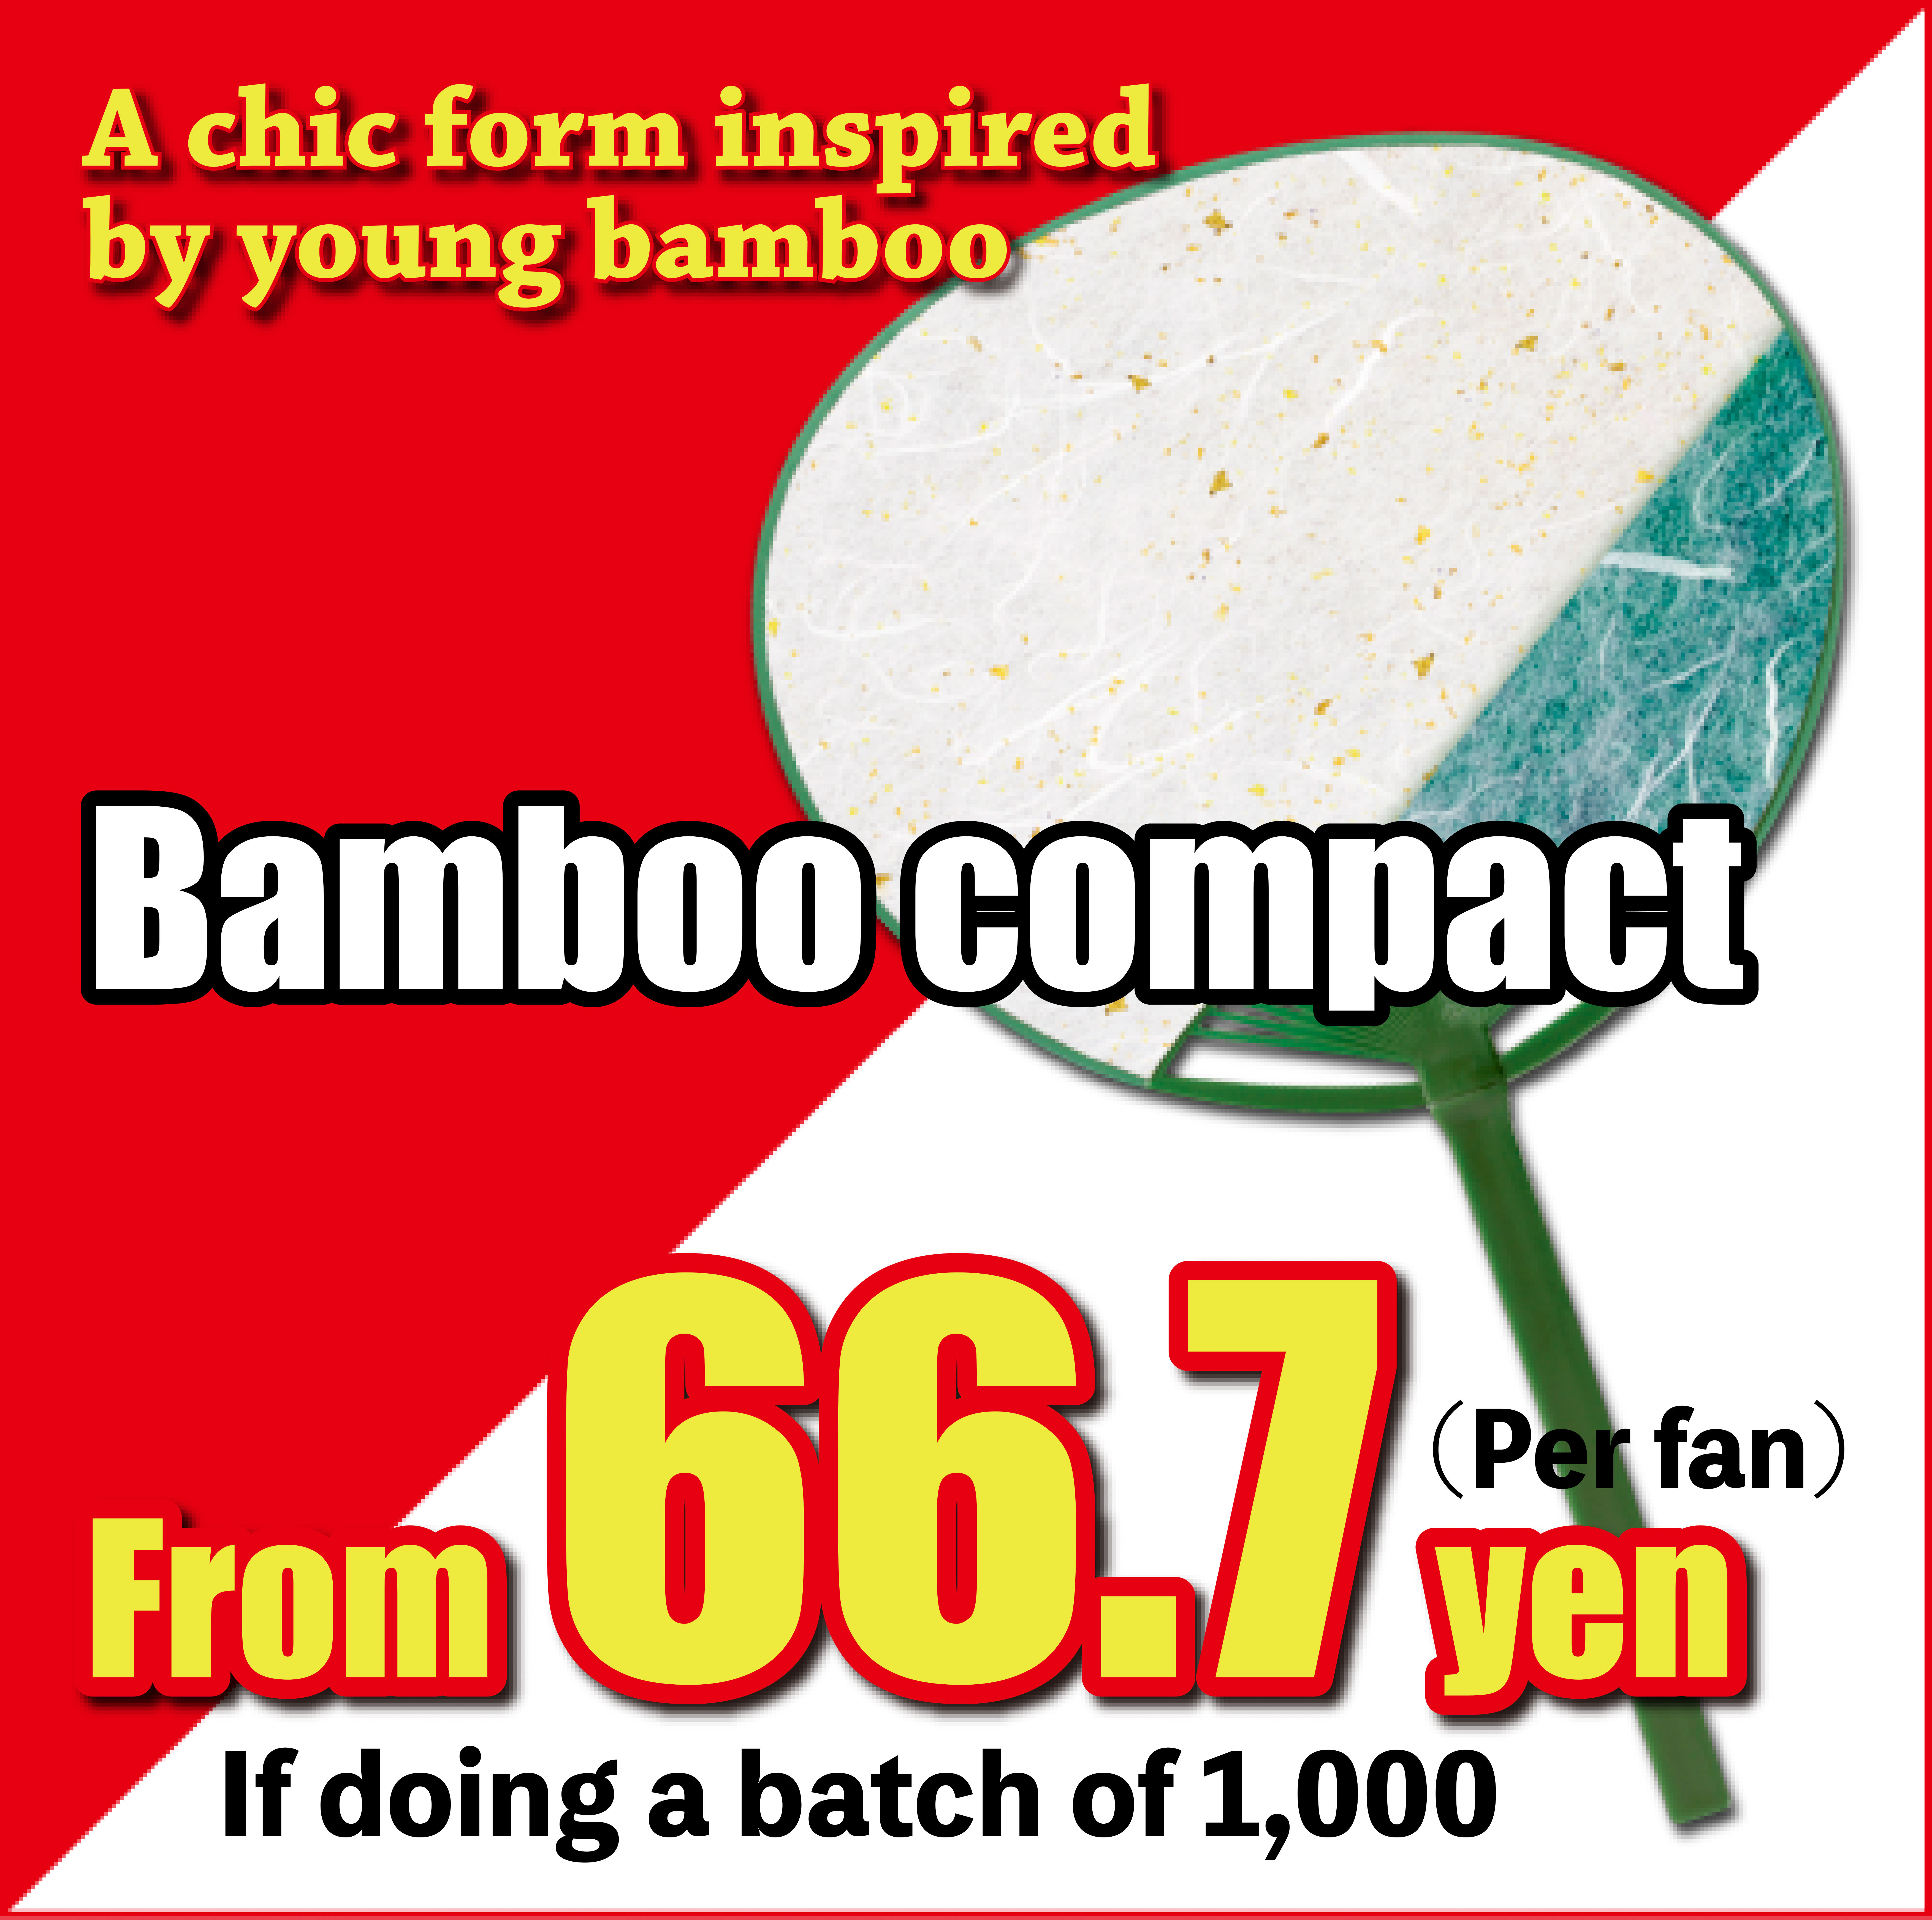 A chic form inspired by young bamboo Bamboo compact. Per fan 36en ～/If doing a batch of 1,000